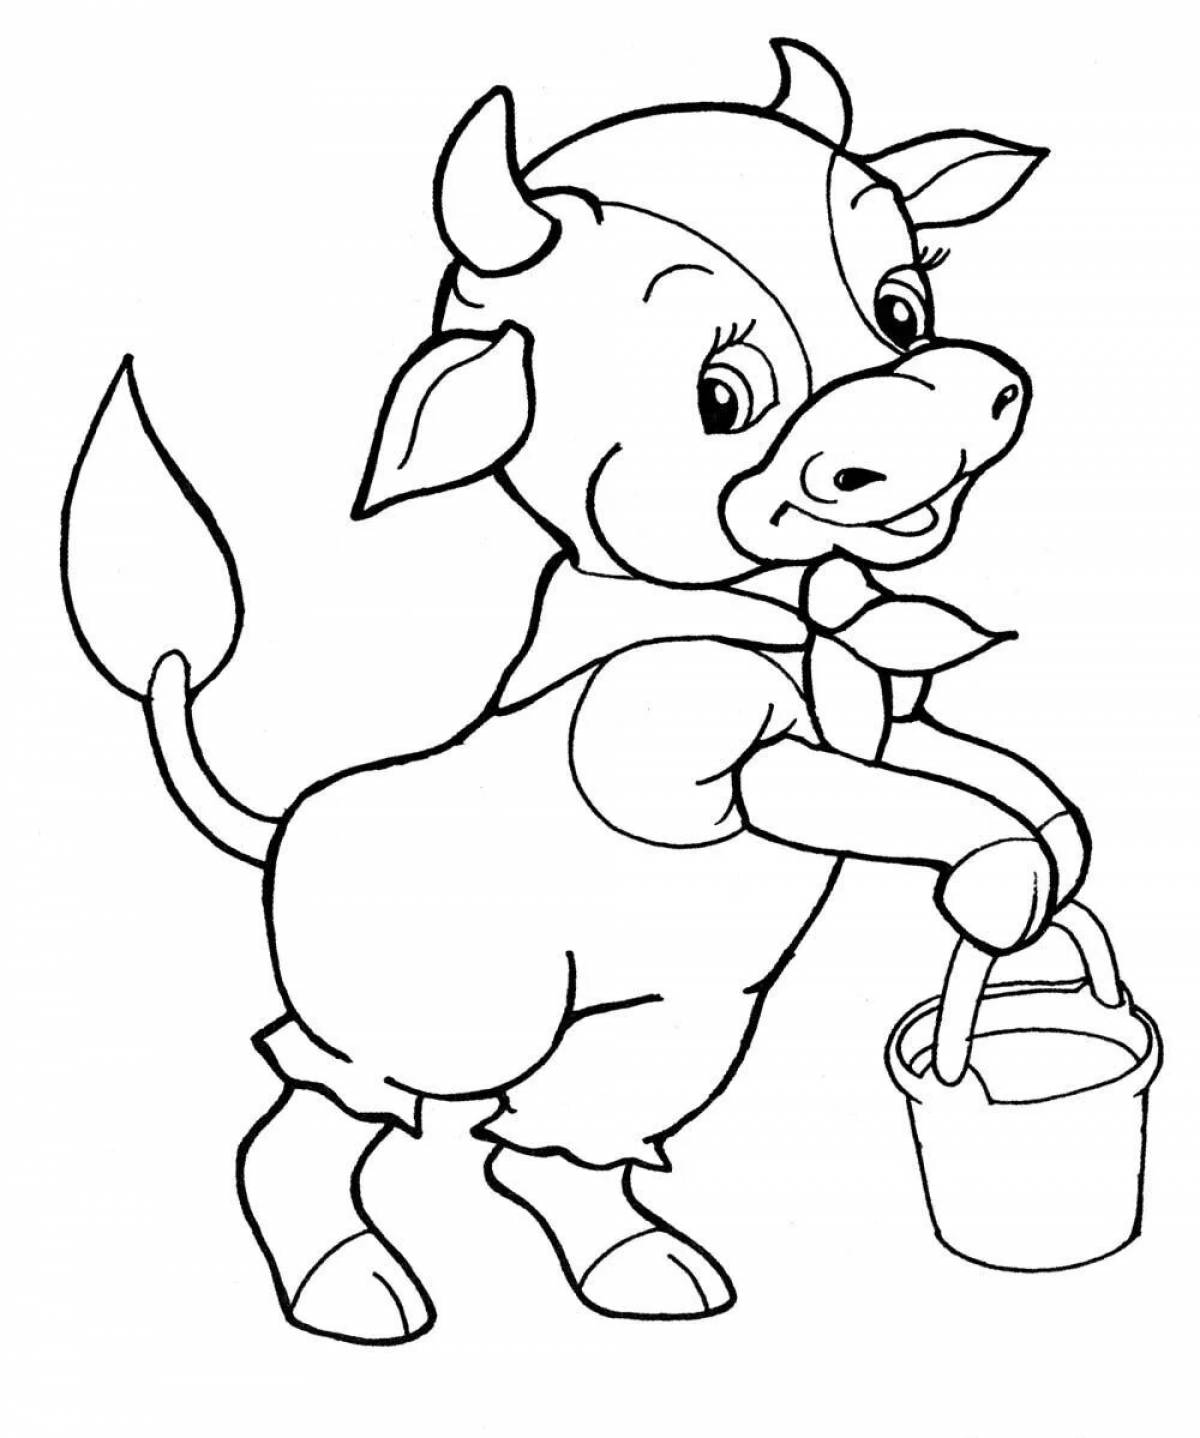 Showy bull coloring for kids